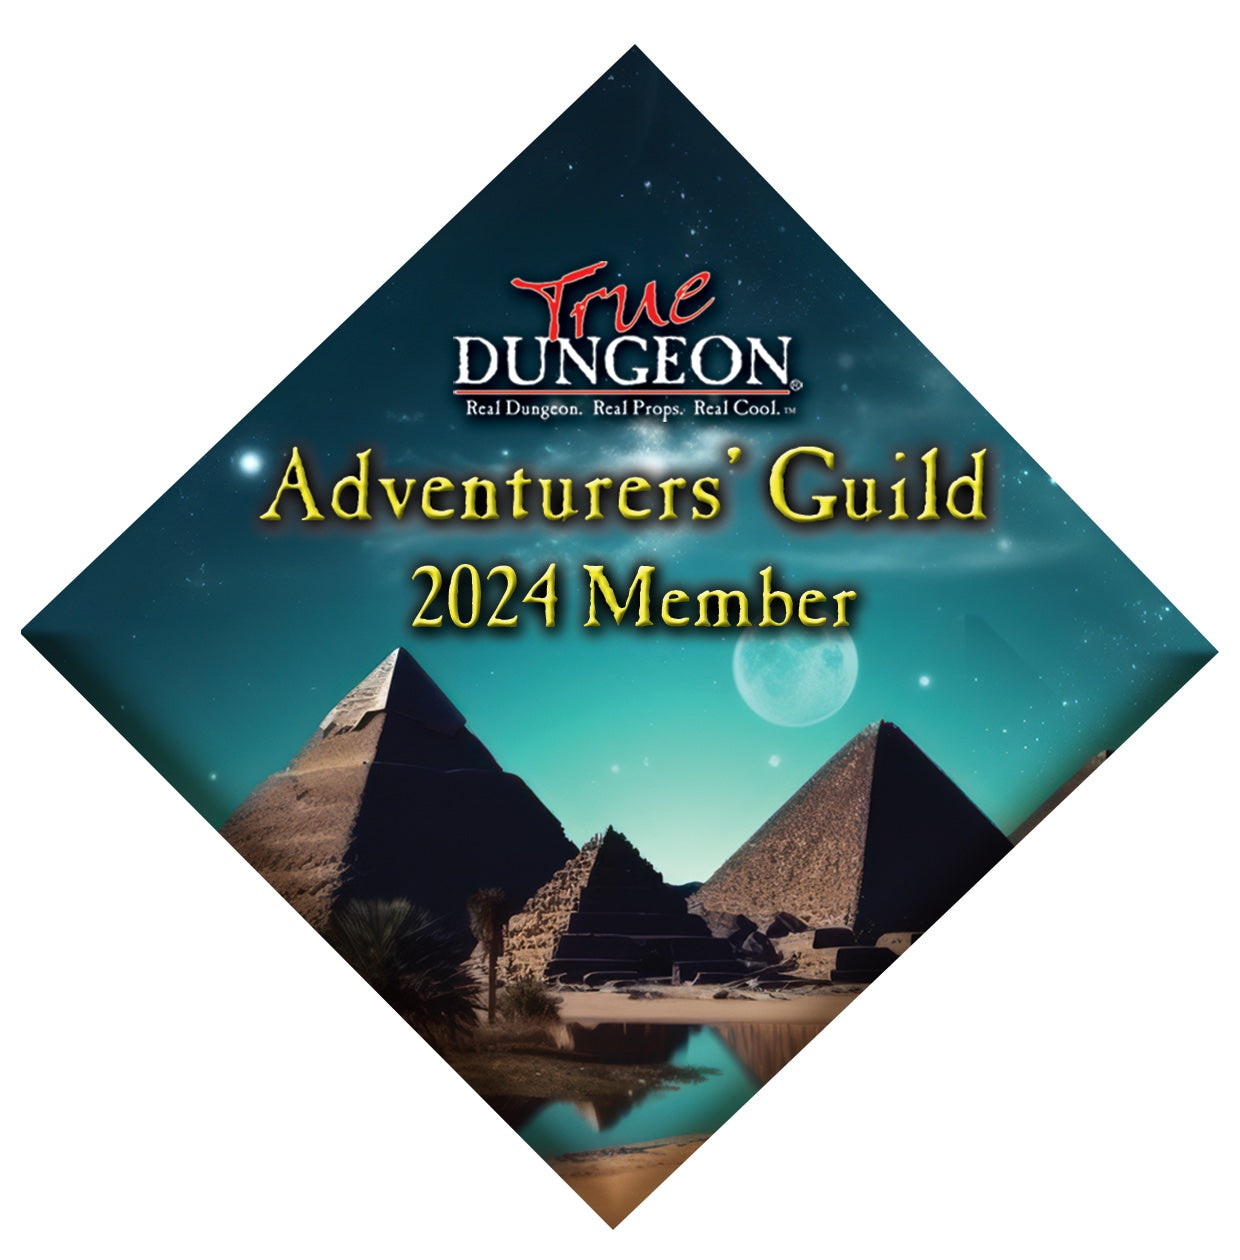 Adventurers' Guild Button and VTD Code #2